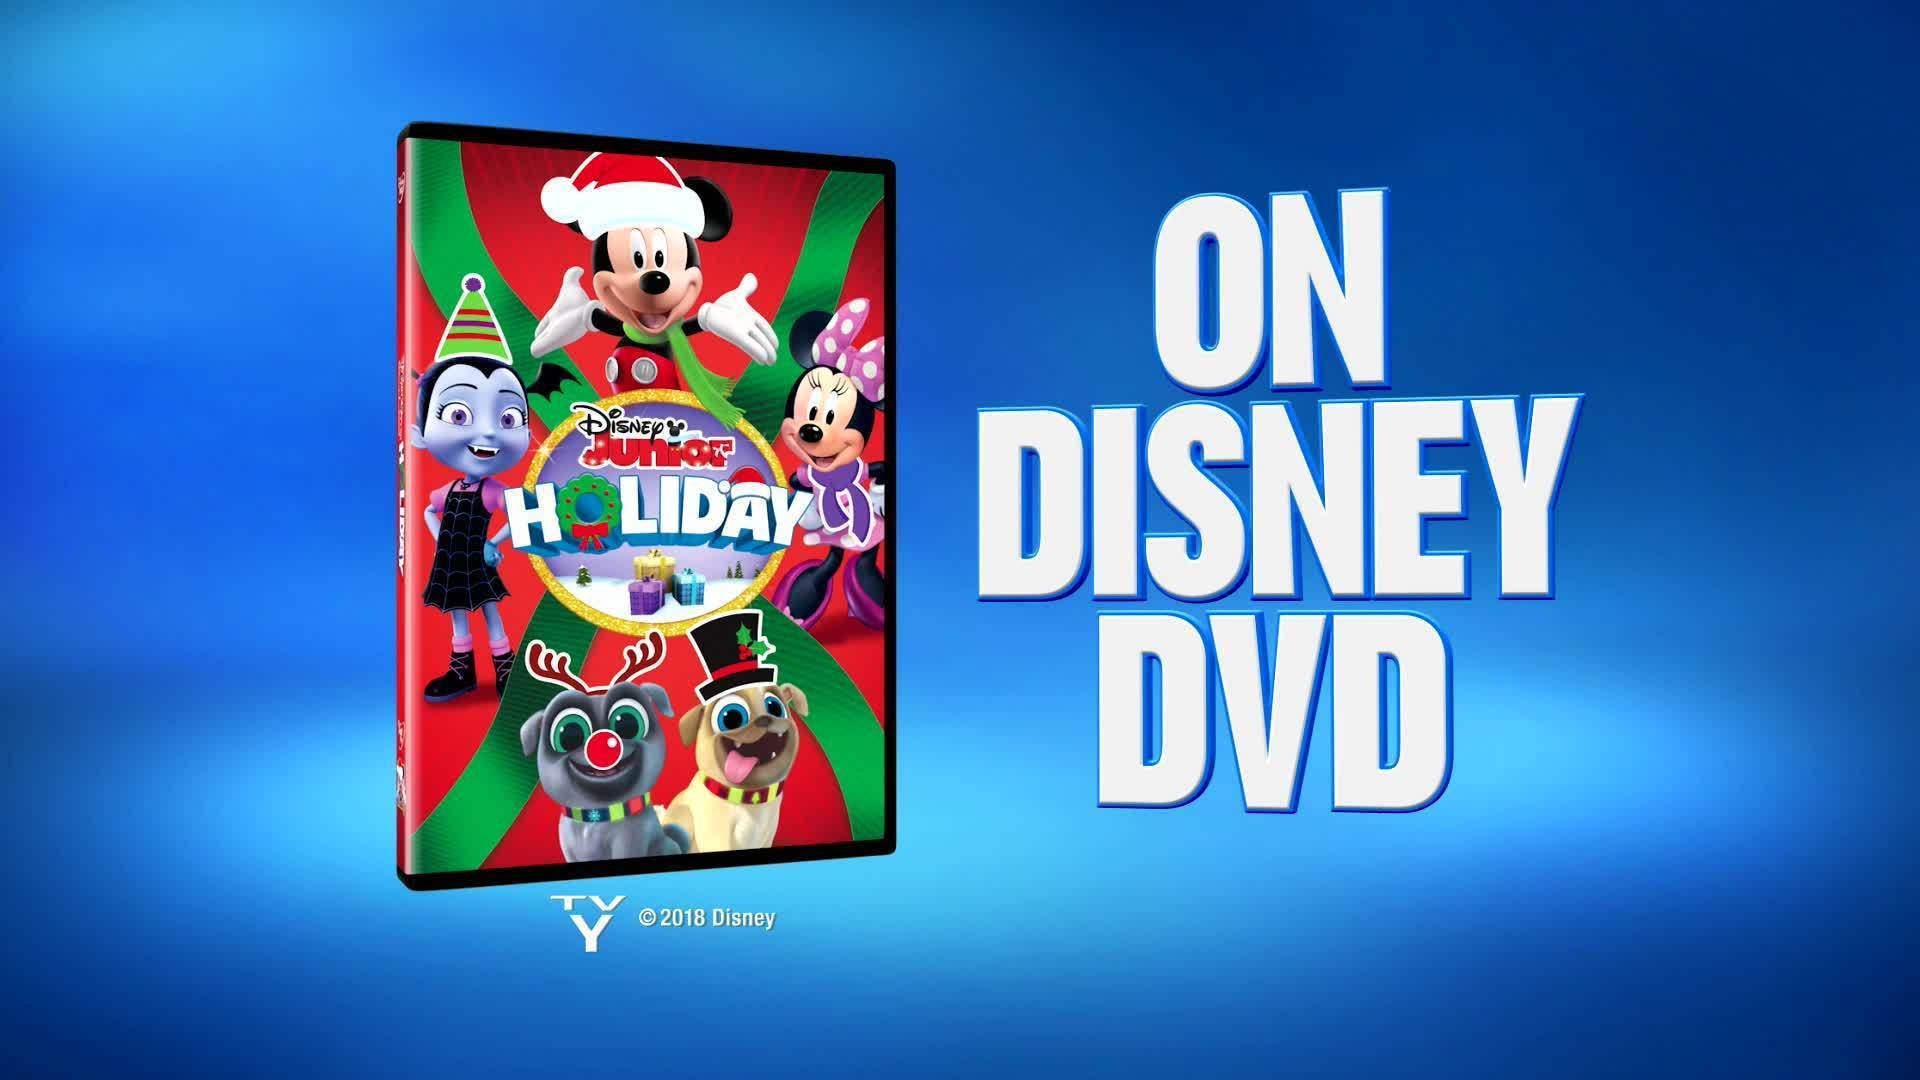 Disney Junior Holiday | Now Available On DVD